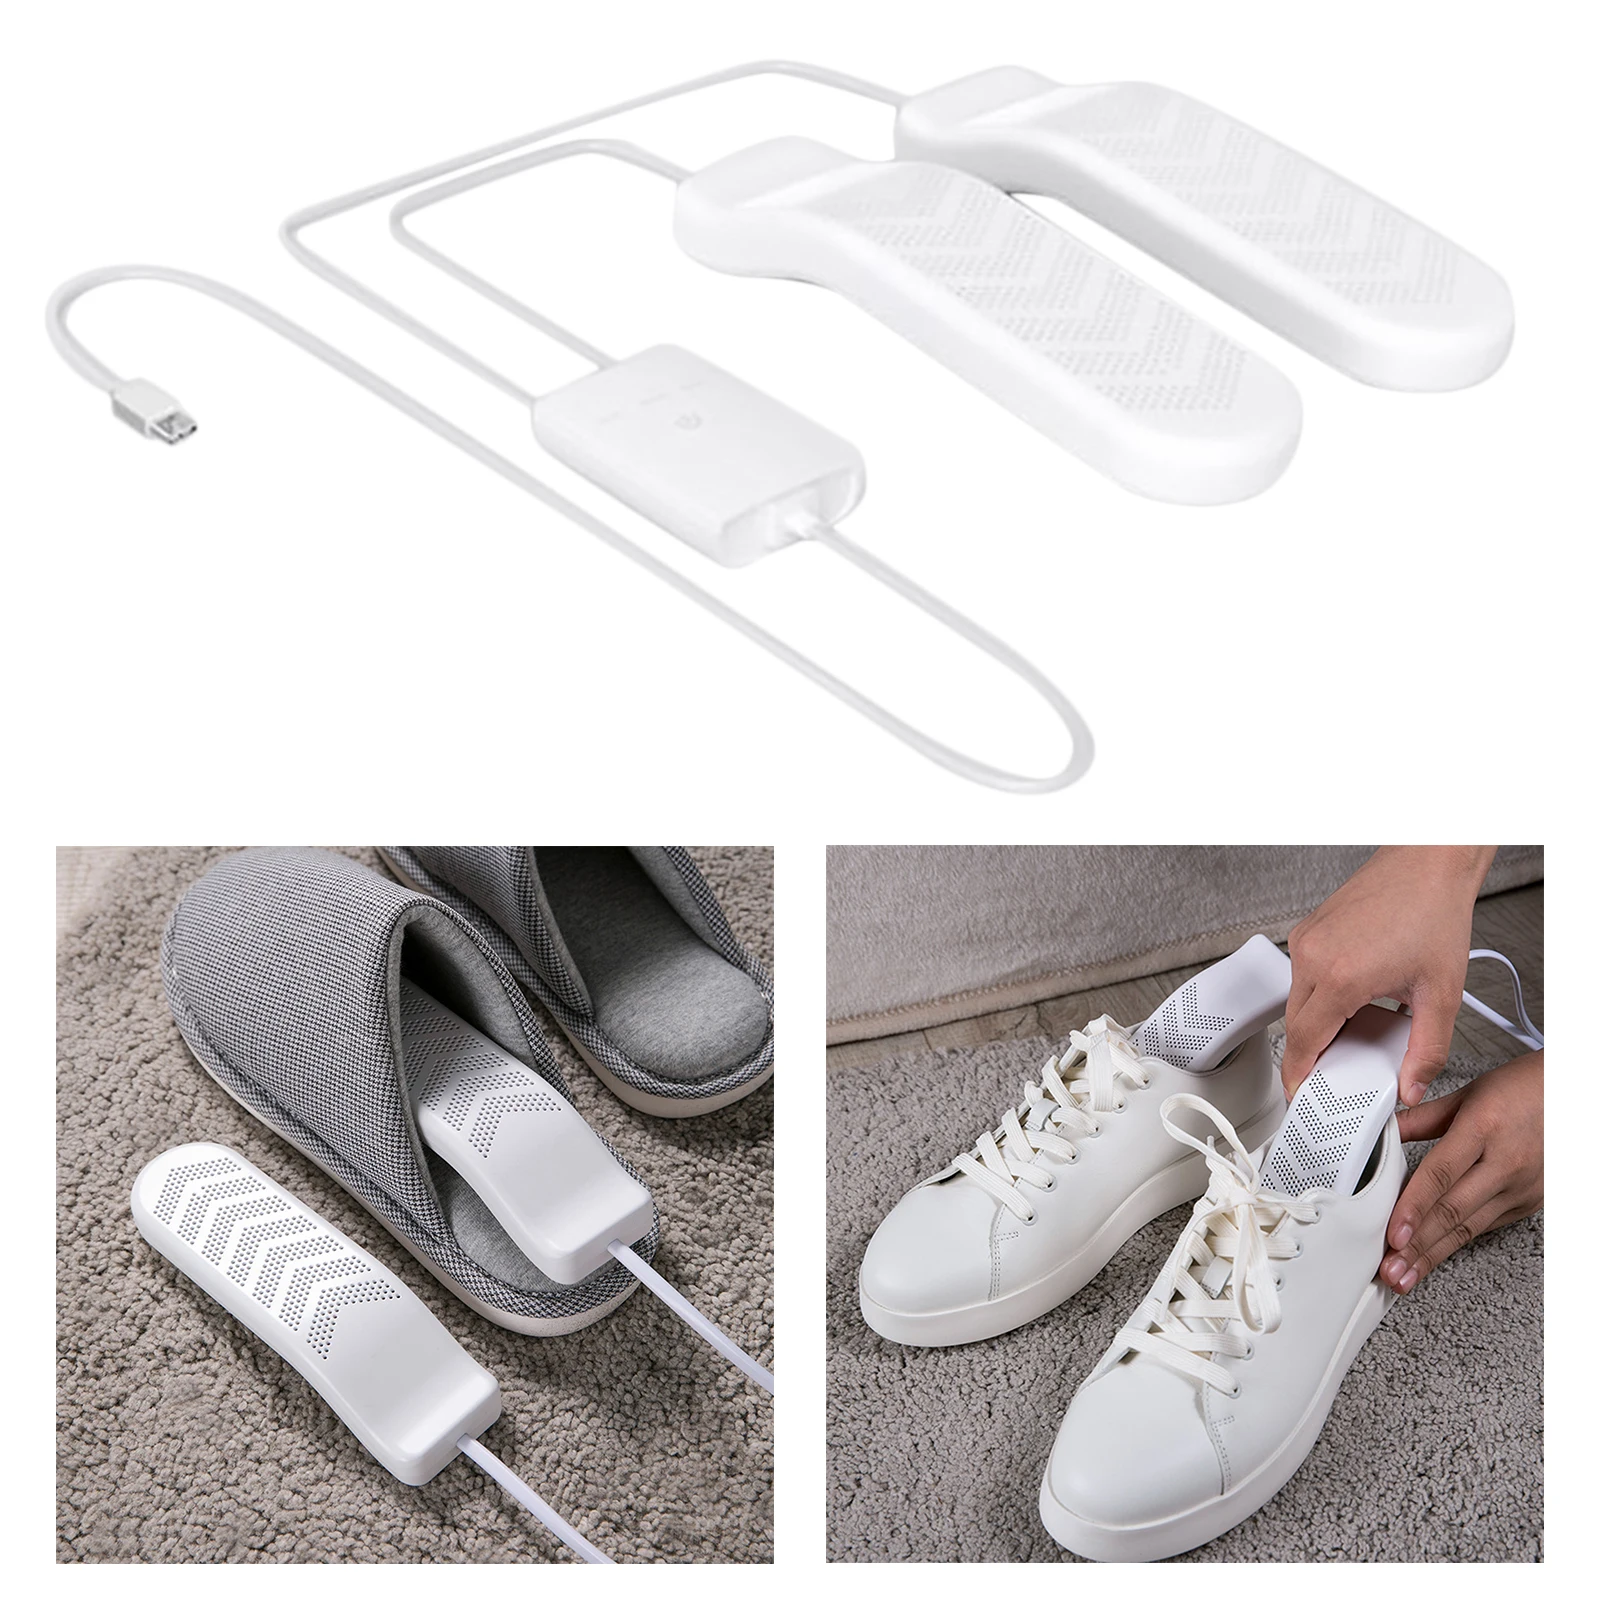 Portable USB Electric Boot Dryer Shoe Dryer Foot Dryer Timing Disinfection Foot Dryer Glove Dryer